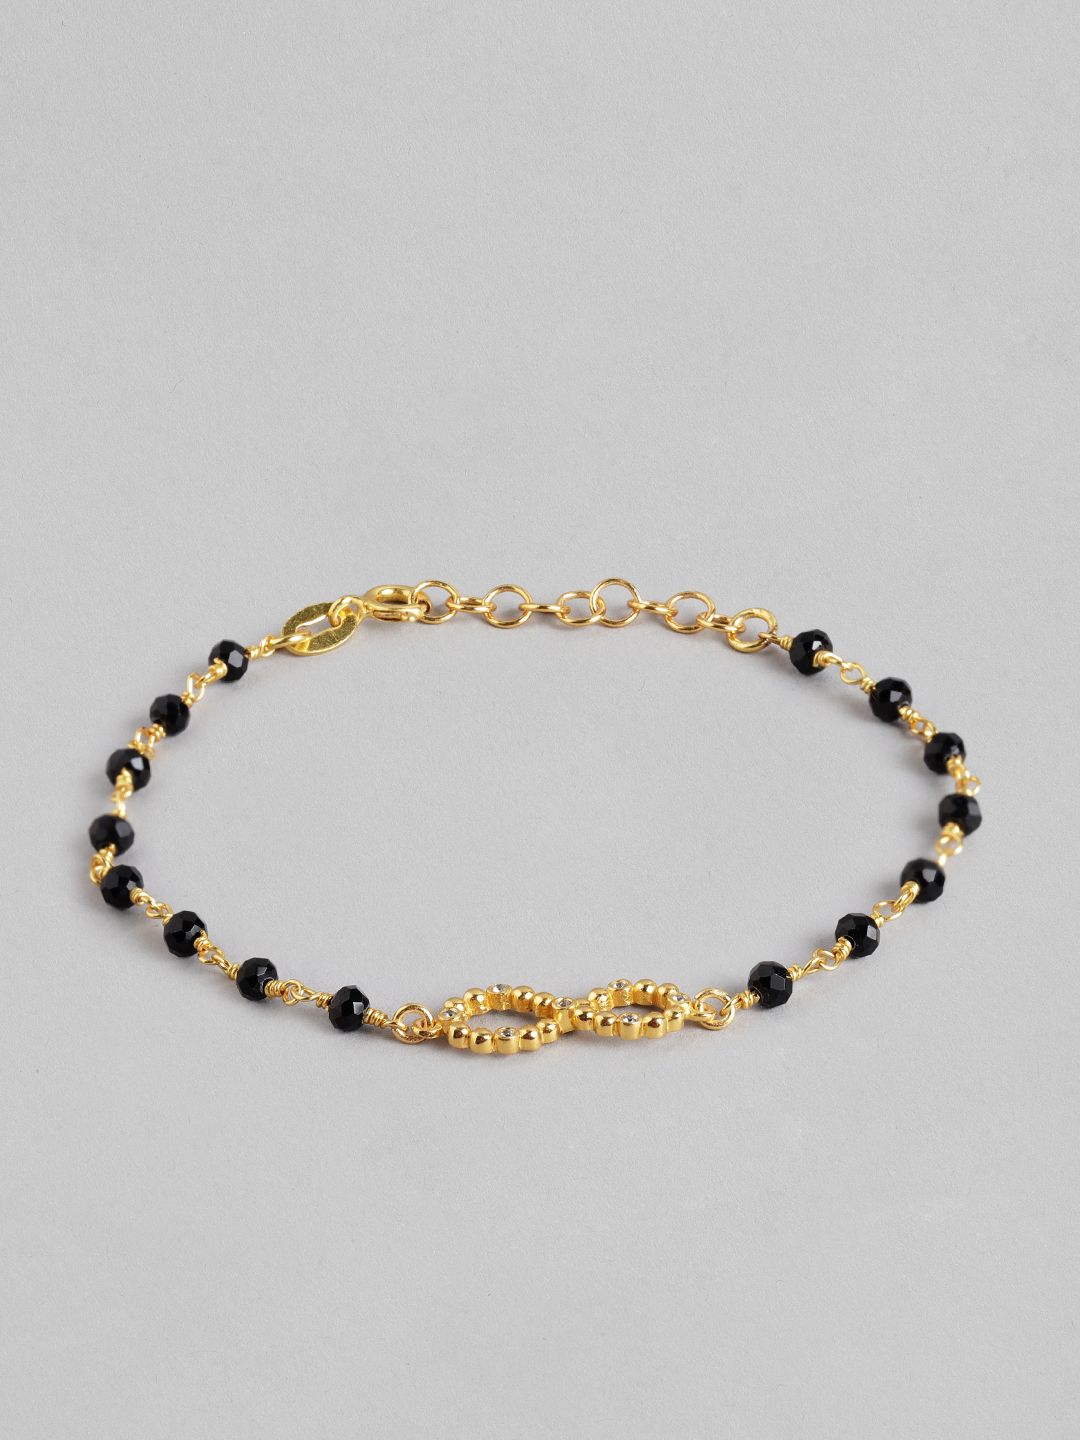 Carlton London Gold-Plated Black CZ Studded Handcrafted Bracelet Price in India